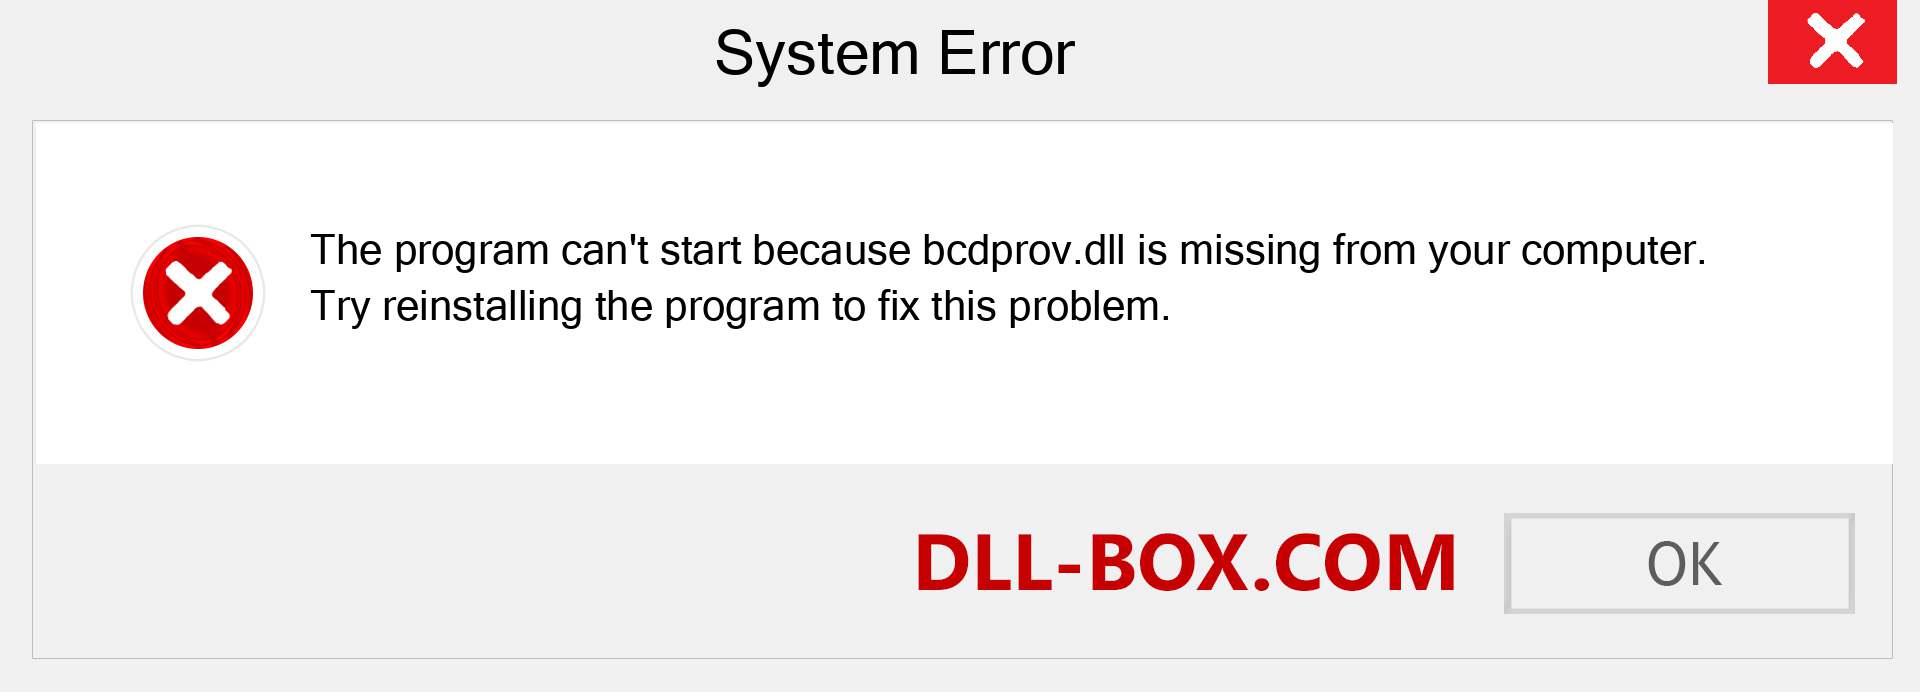  bcdprov.dll file is missing?. Download for Windows 7, 8, 10 - Fix  bcdprov dll Missing Error on Windows, photos, images